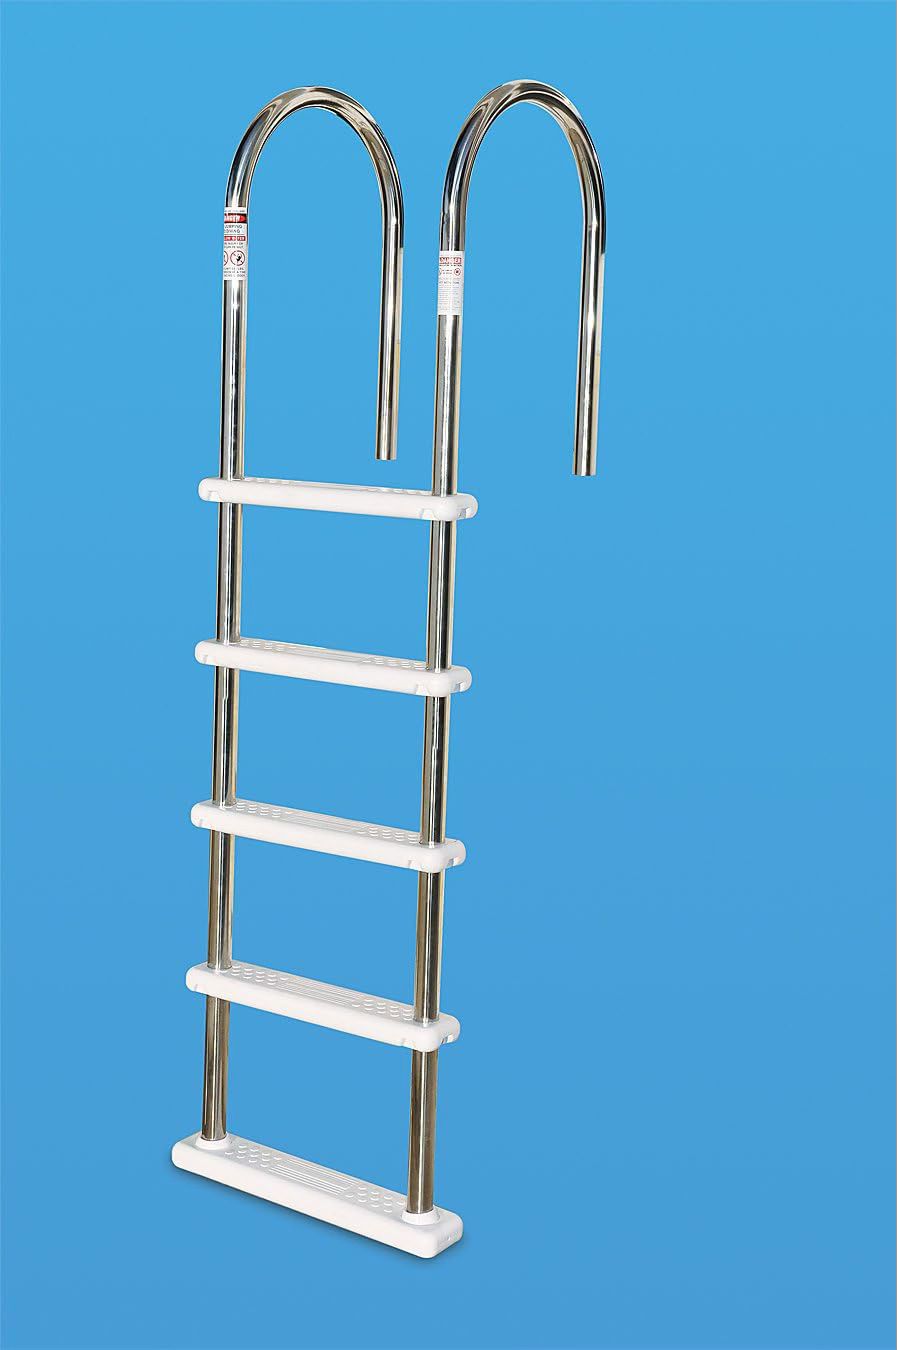 Stainless Steel Pool Ladder Entry Exit System with Handrails Collection Options for Above Ground & Inground Pools with Extra La